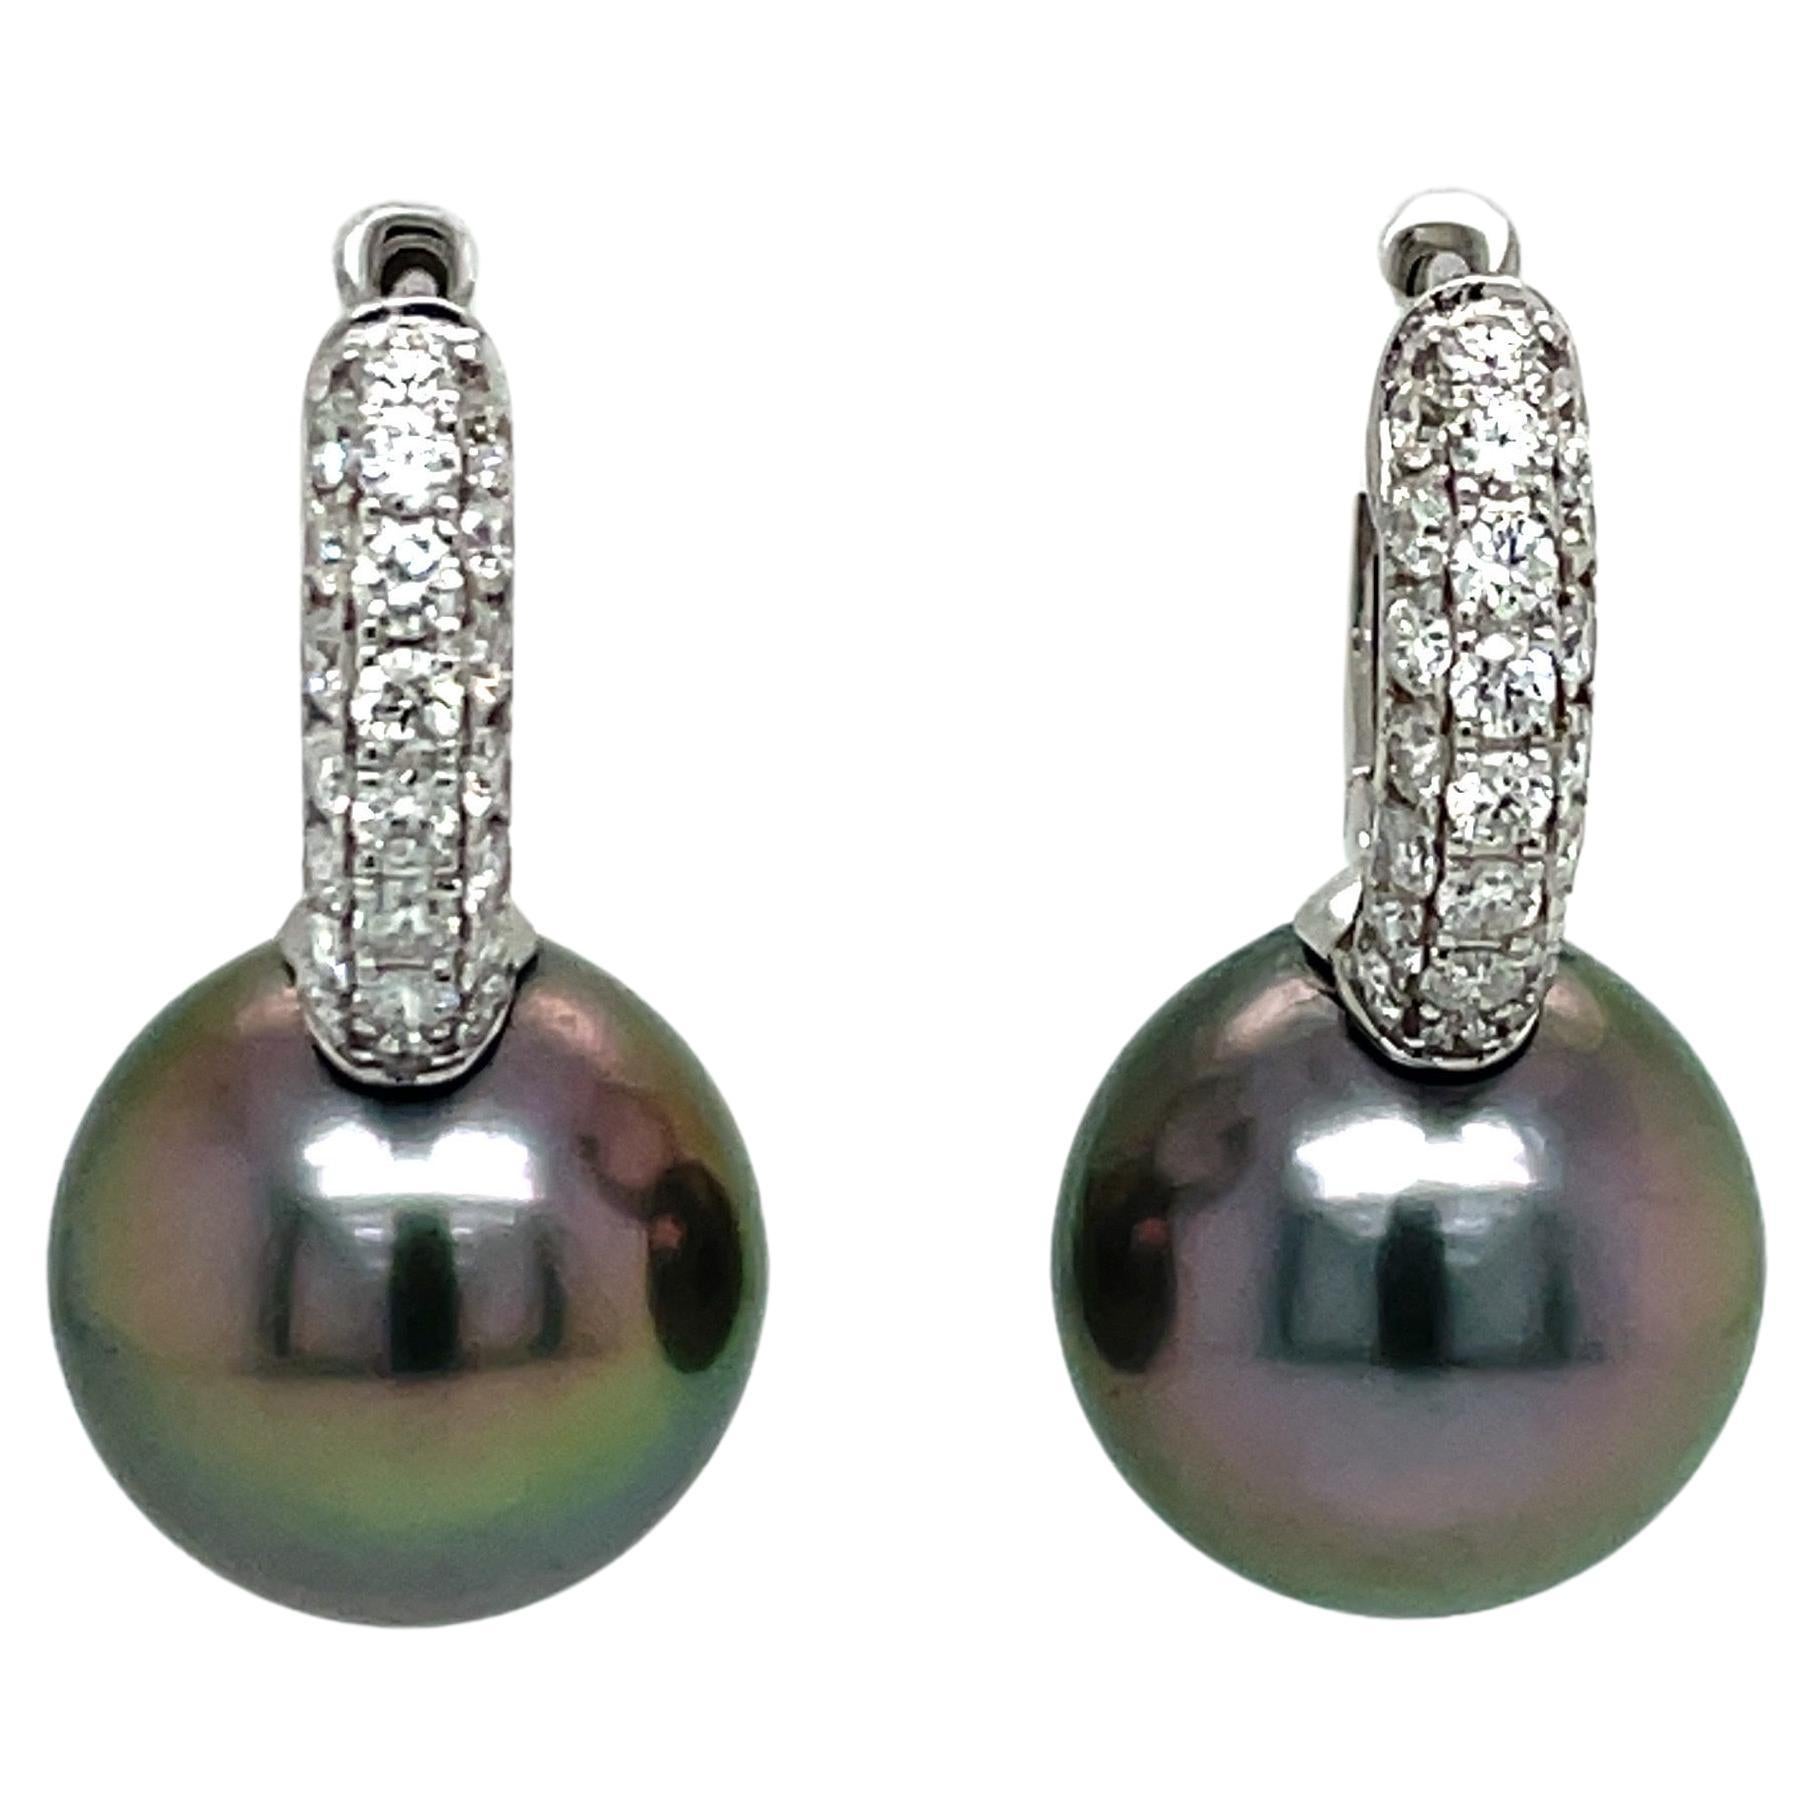 18 Karat White Gold drop earrings featuring 44 round brilliants weighing 0.78 Carats and two Tahitian pearls measuring 12-13 MM.
Can customize pearl to Golden, Pink or White South Sea. 
DM for more pricing. 